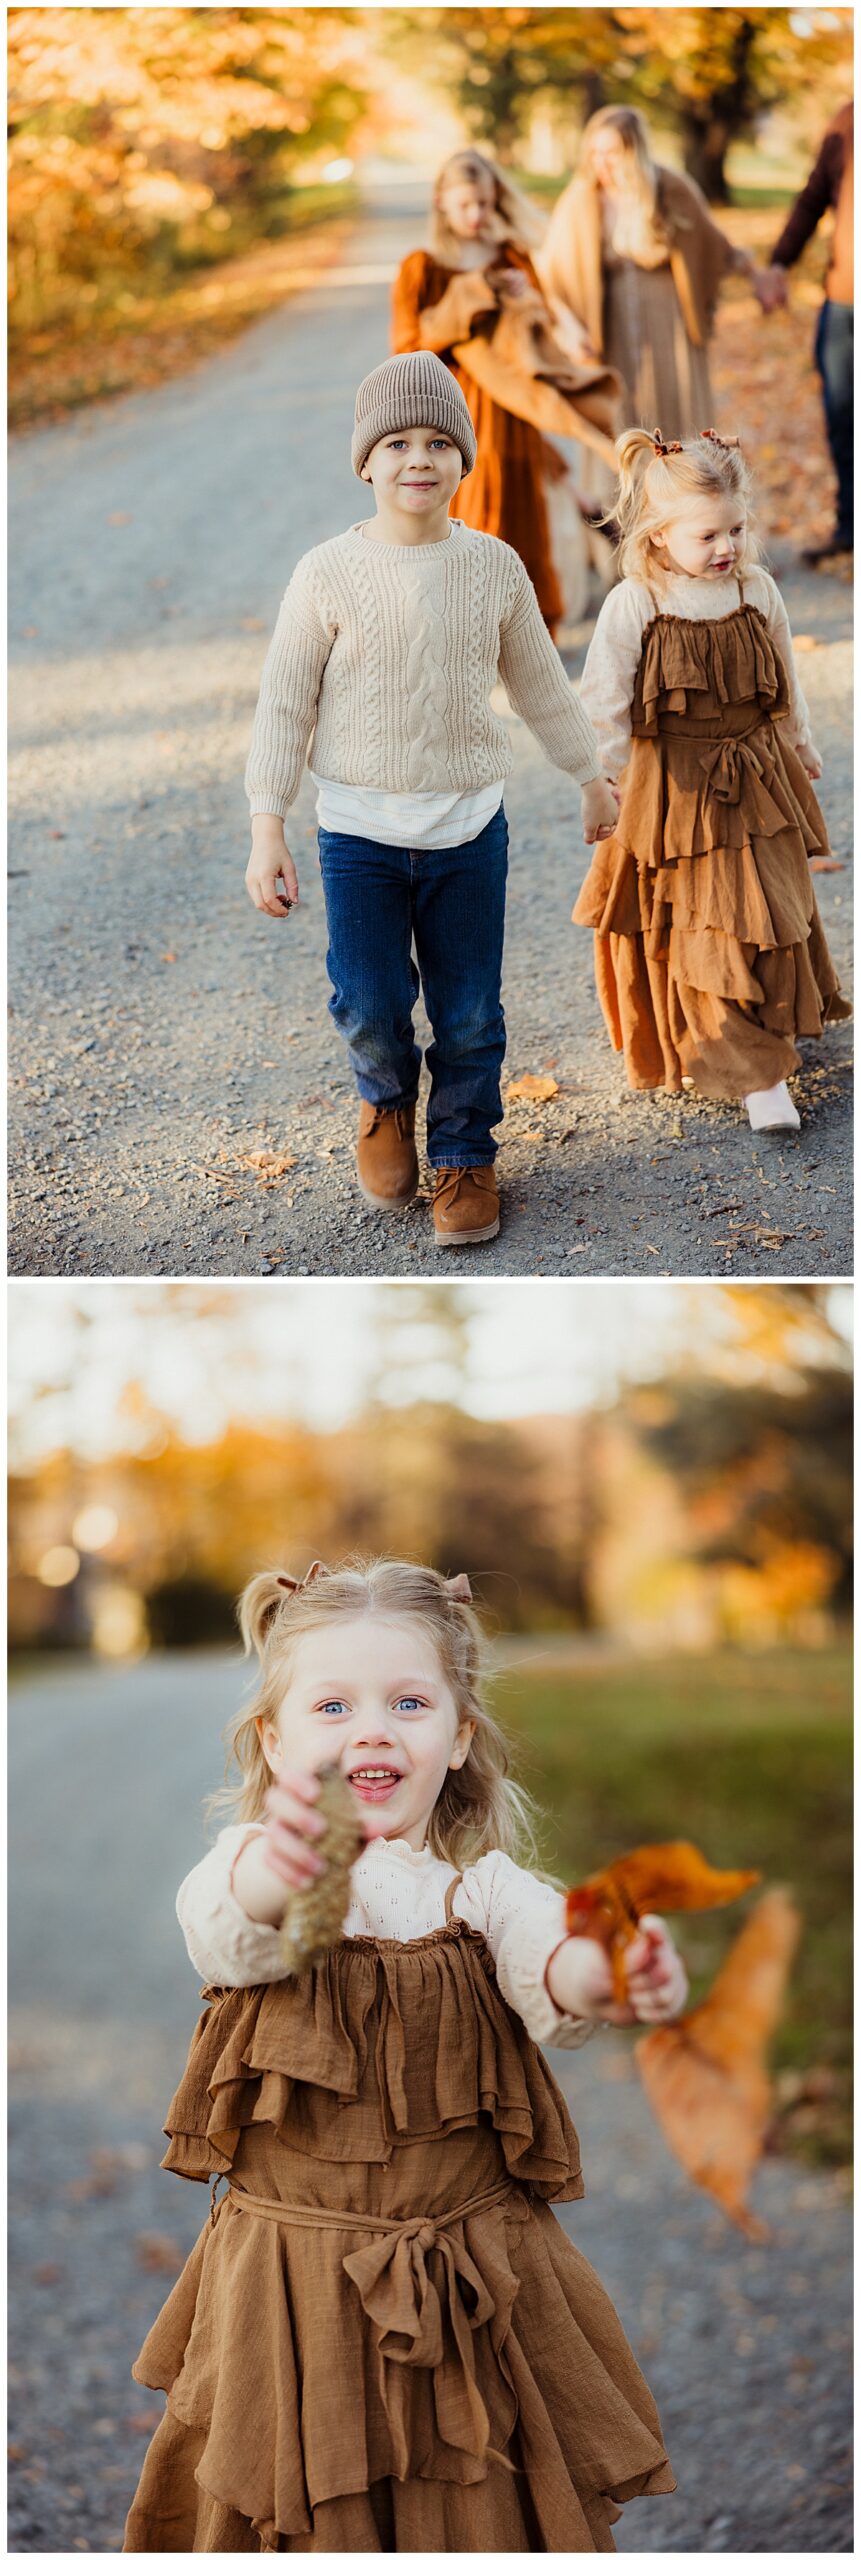 Little ones share big smiles for Virginia Family Photographer